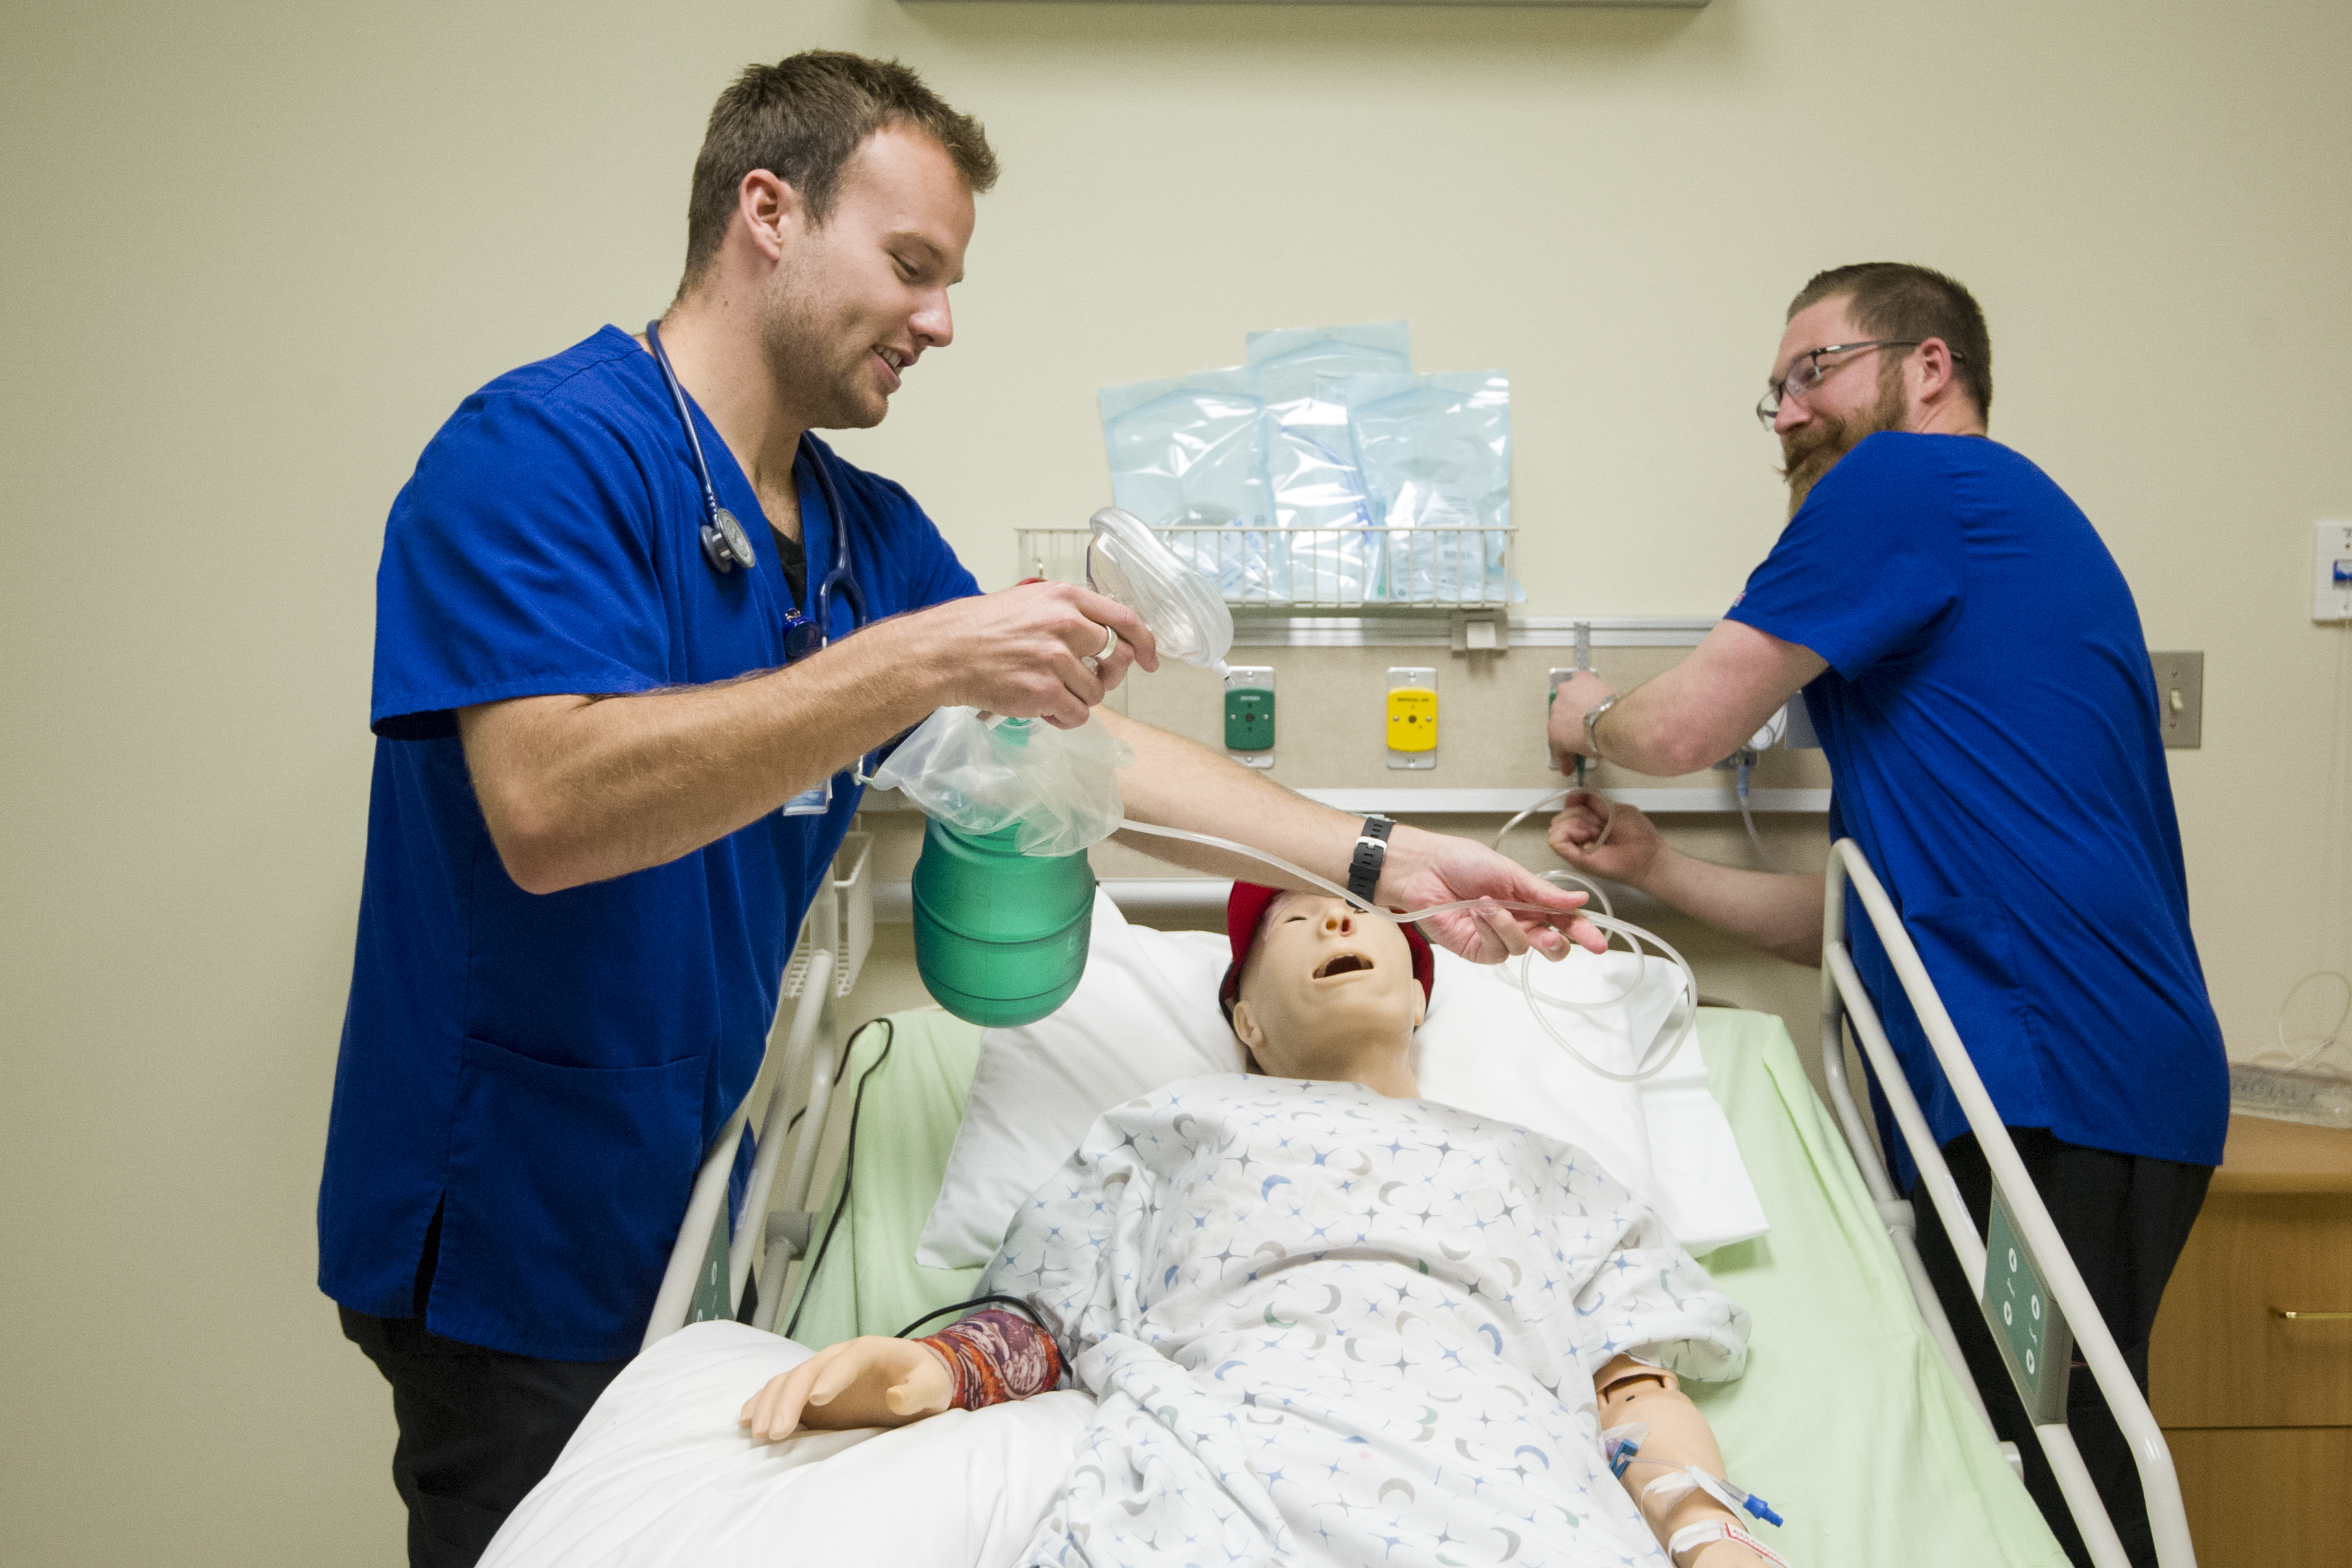 Students actively working with a high fidelity manikin in the simulation lab